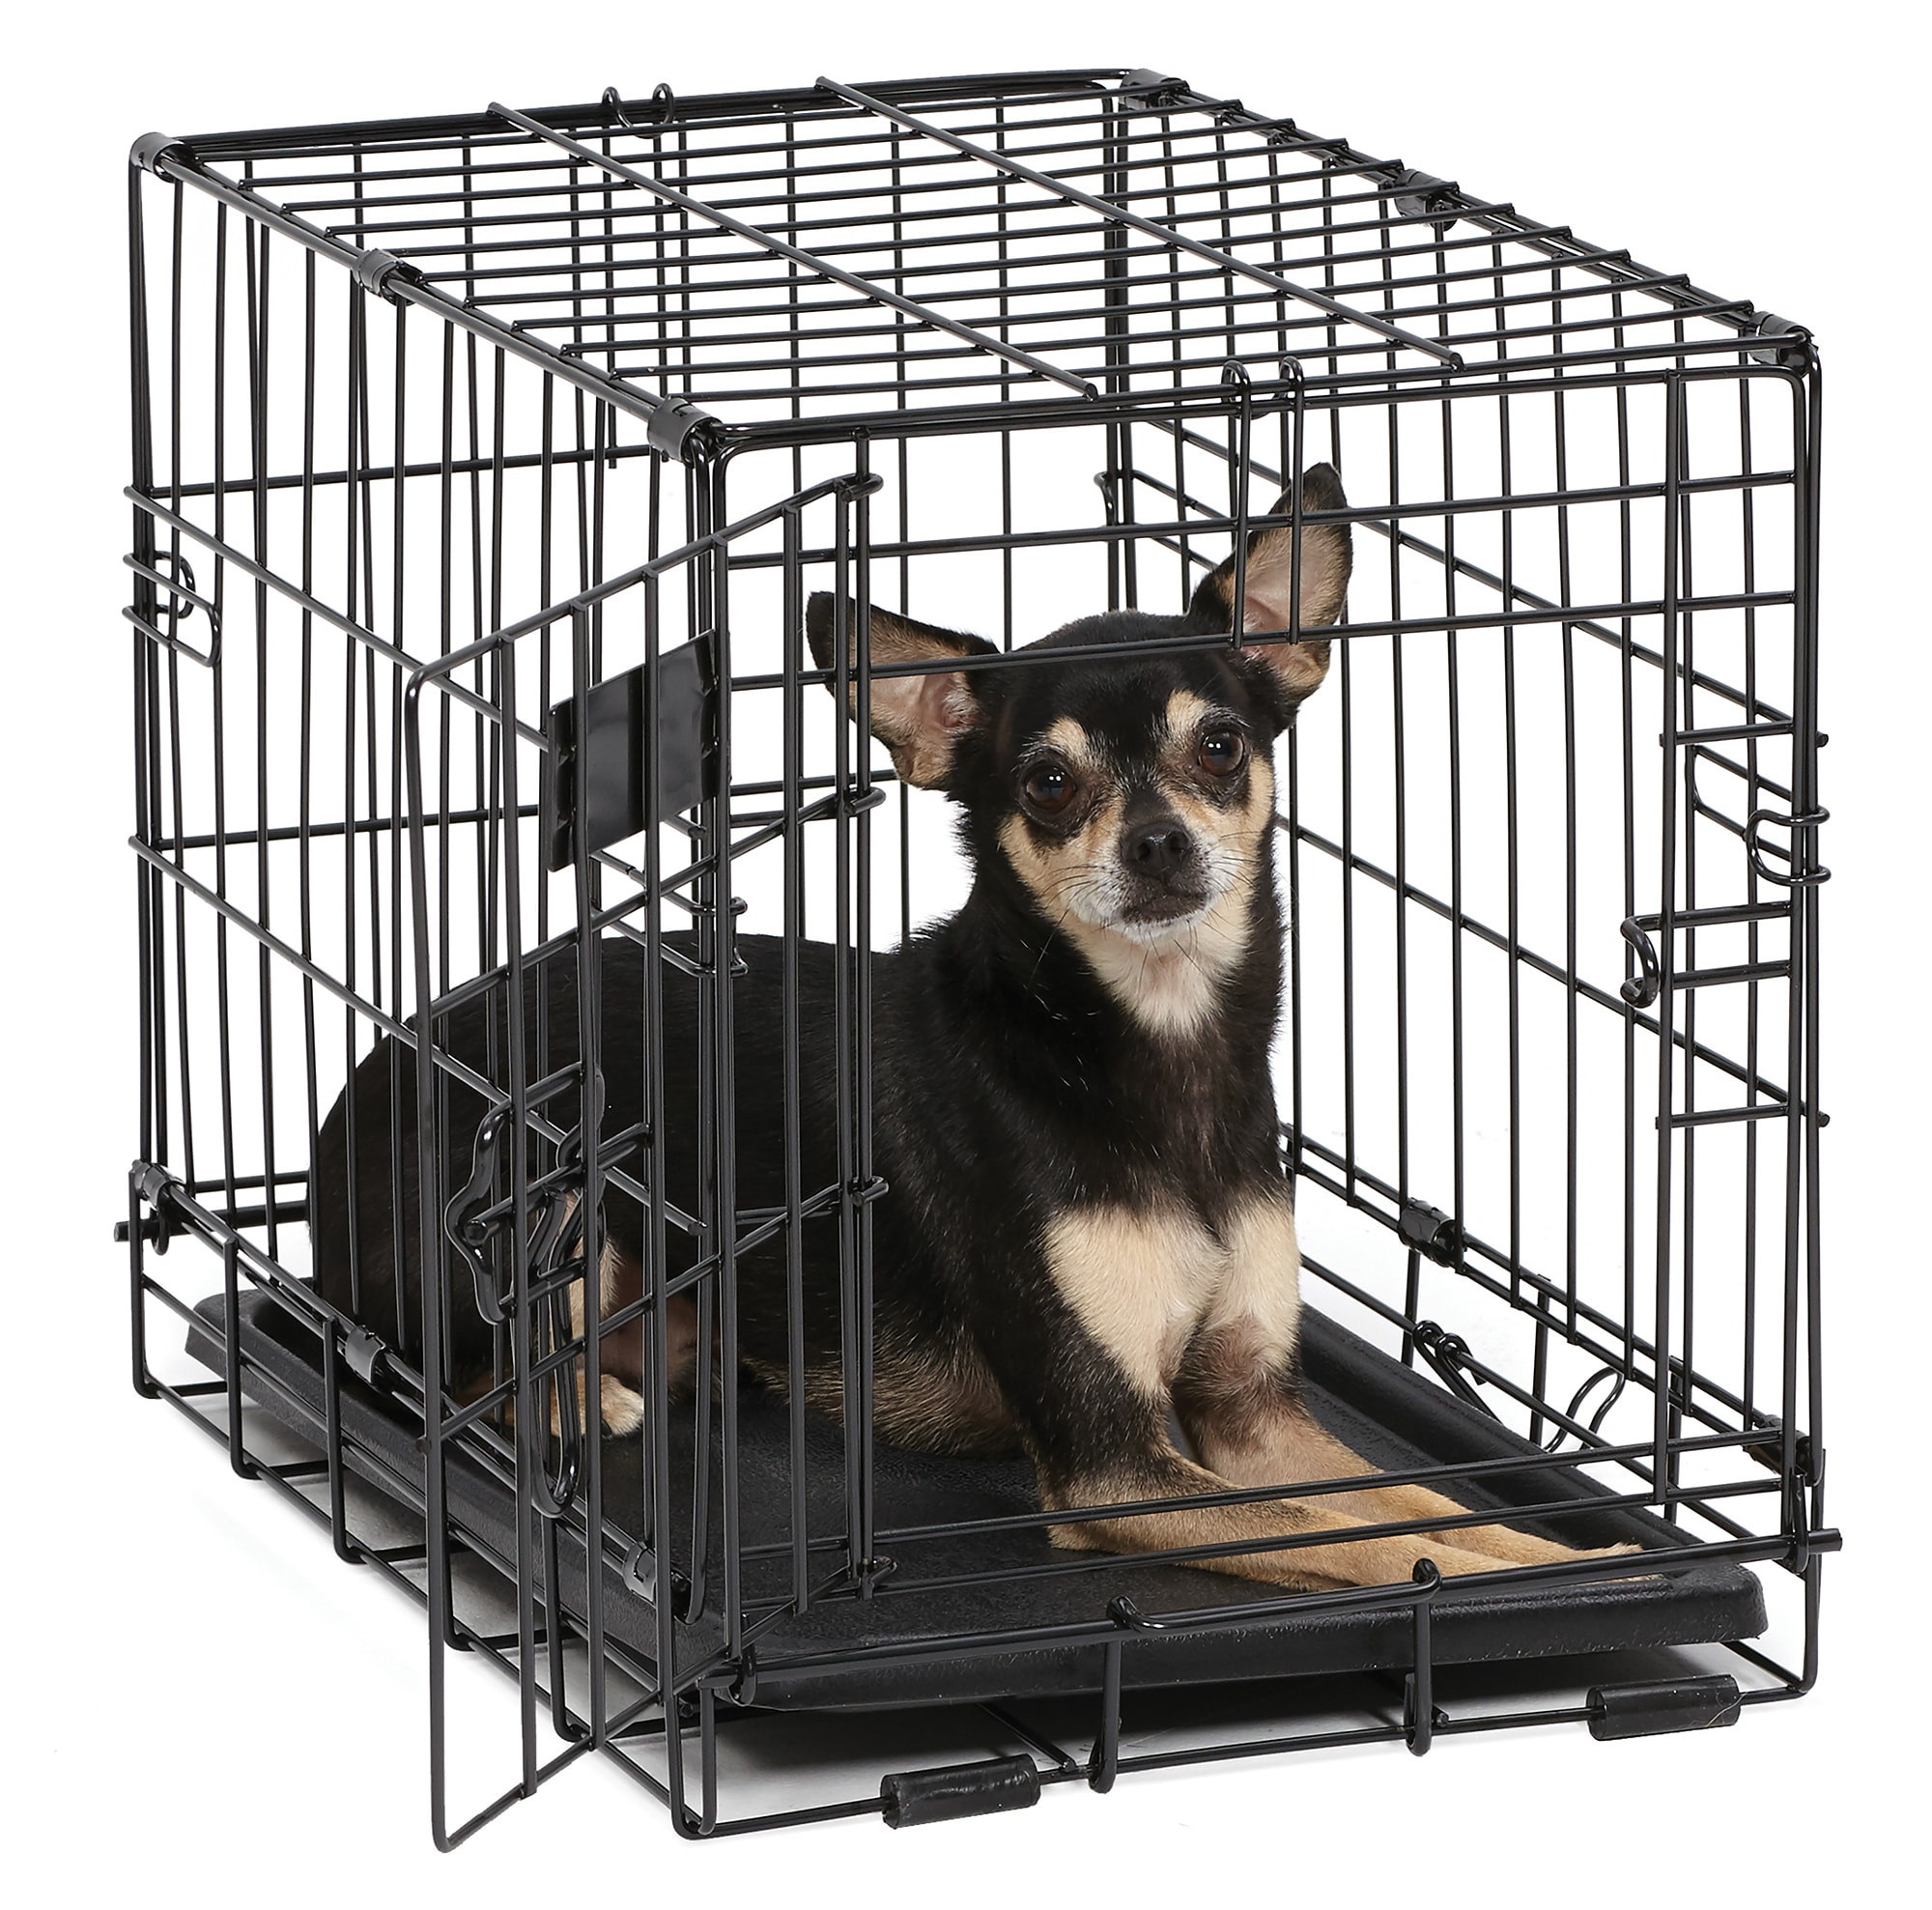 Midwest iCrate Double Door Folding Dog Crate, 36 L X 23 W X 25 H